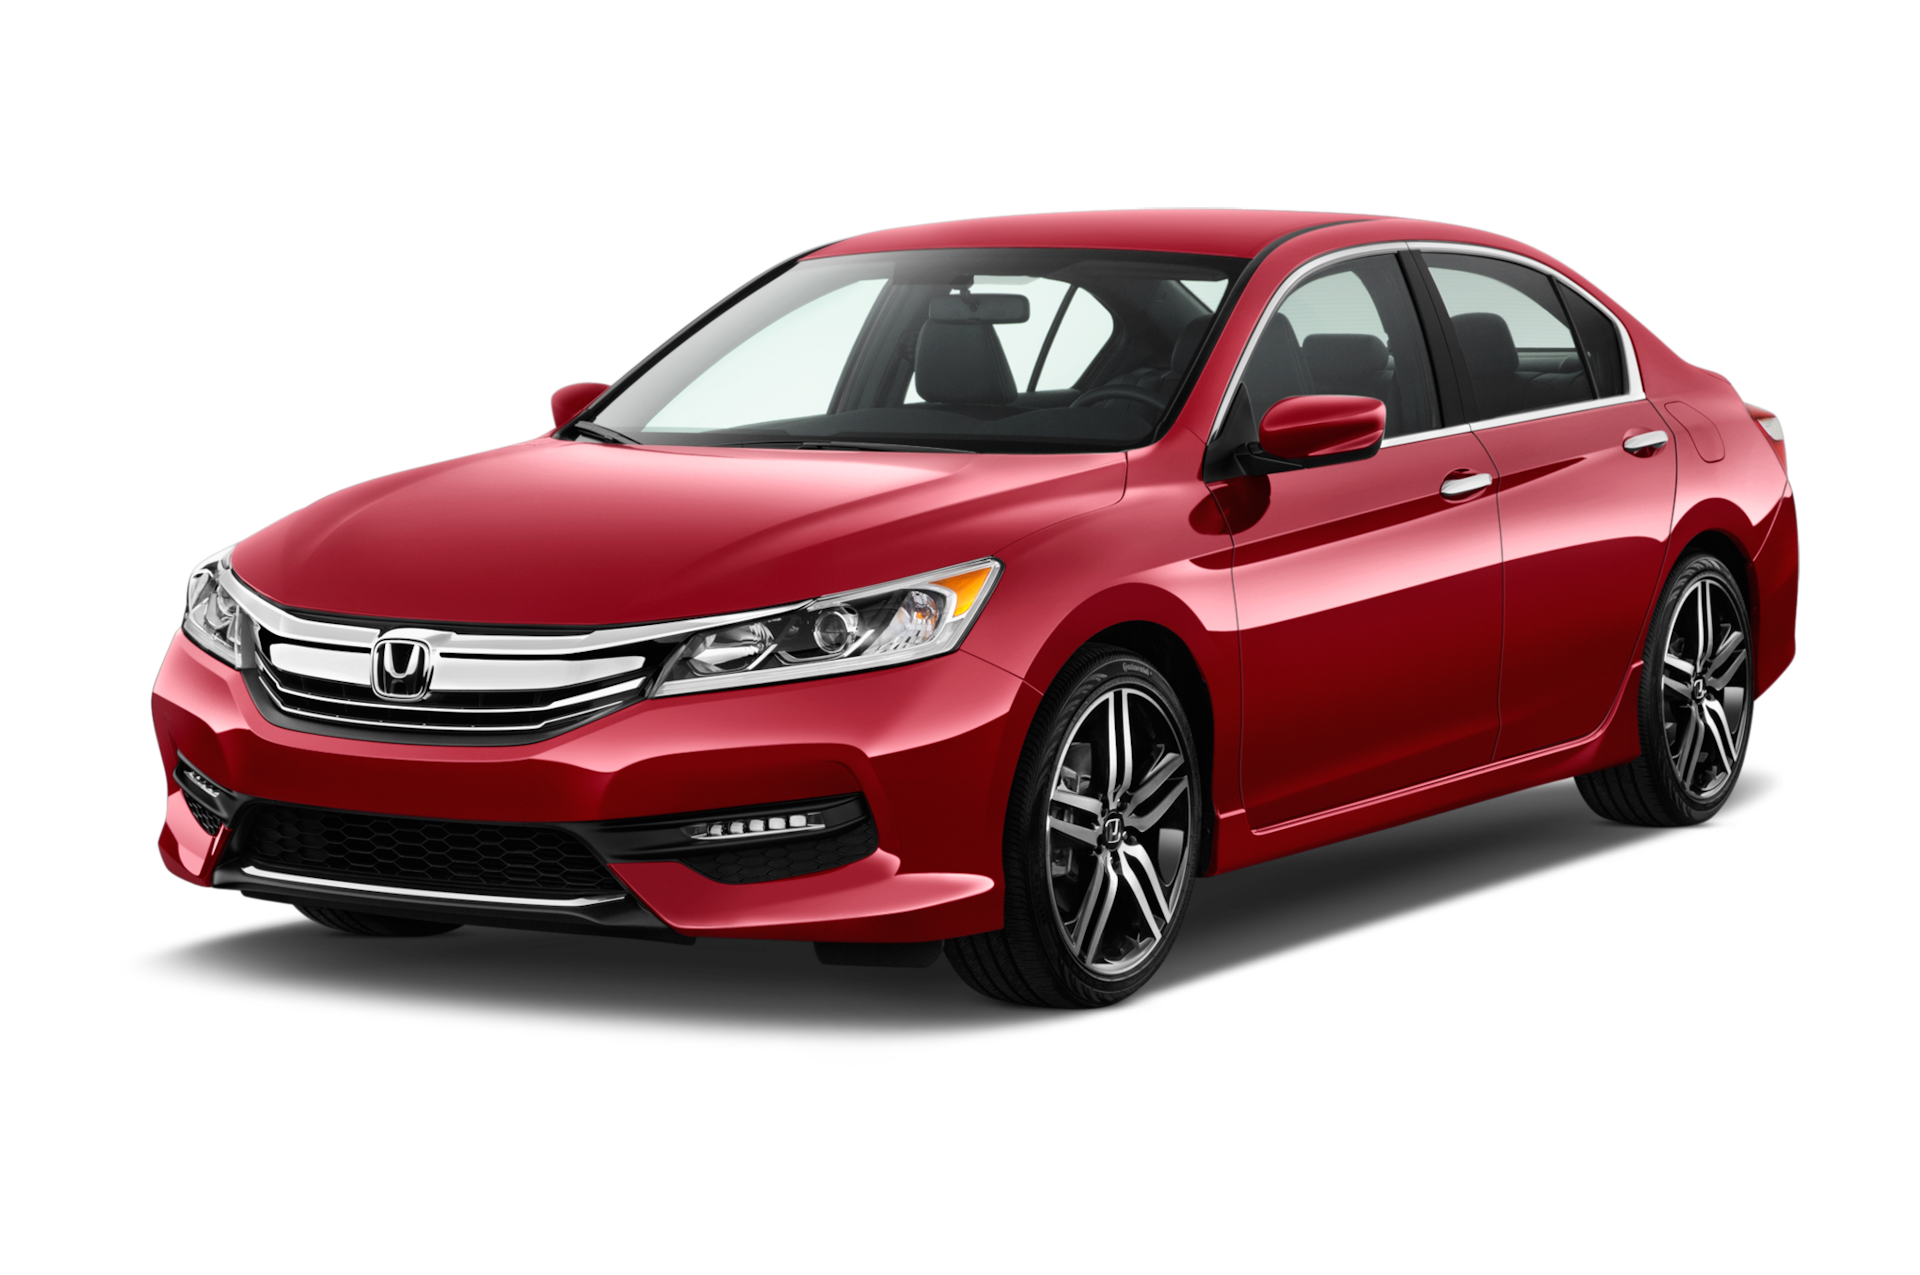 2017 Honda Accord Prices, Reviews, and Photos - MotorTrend